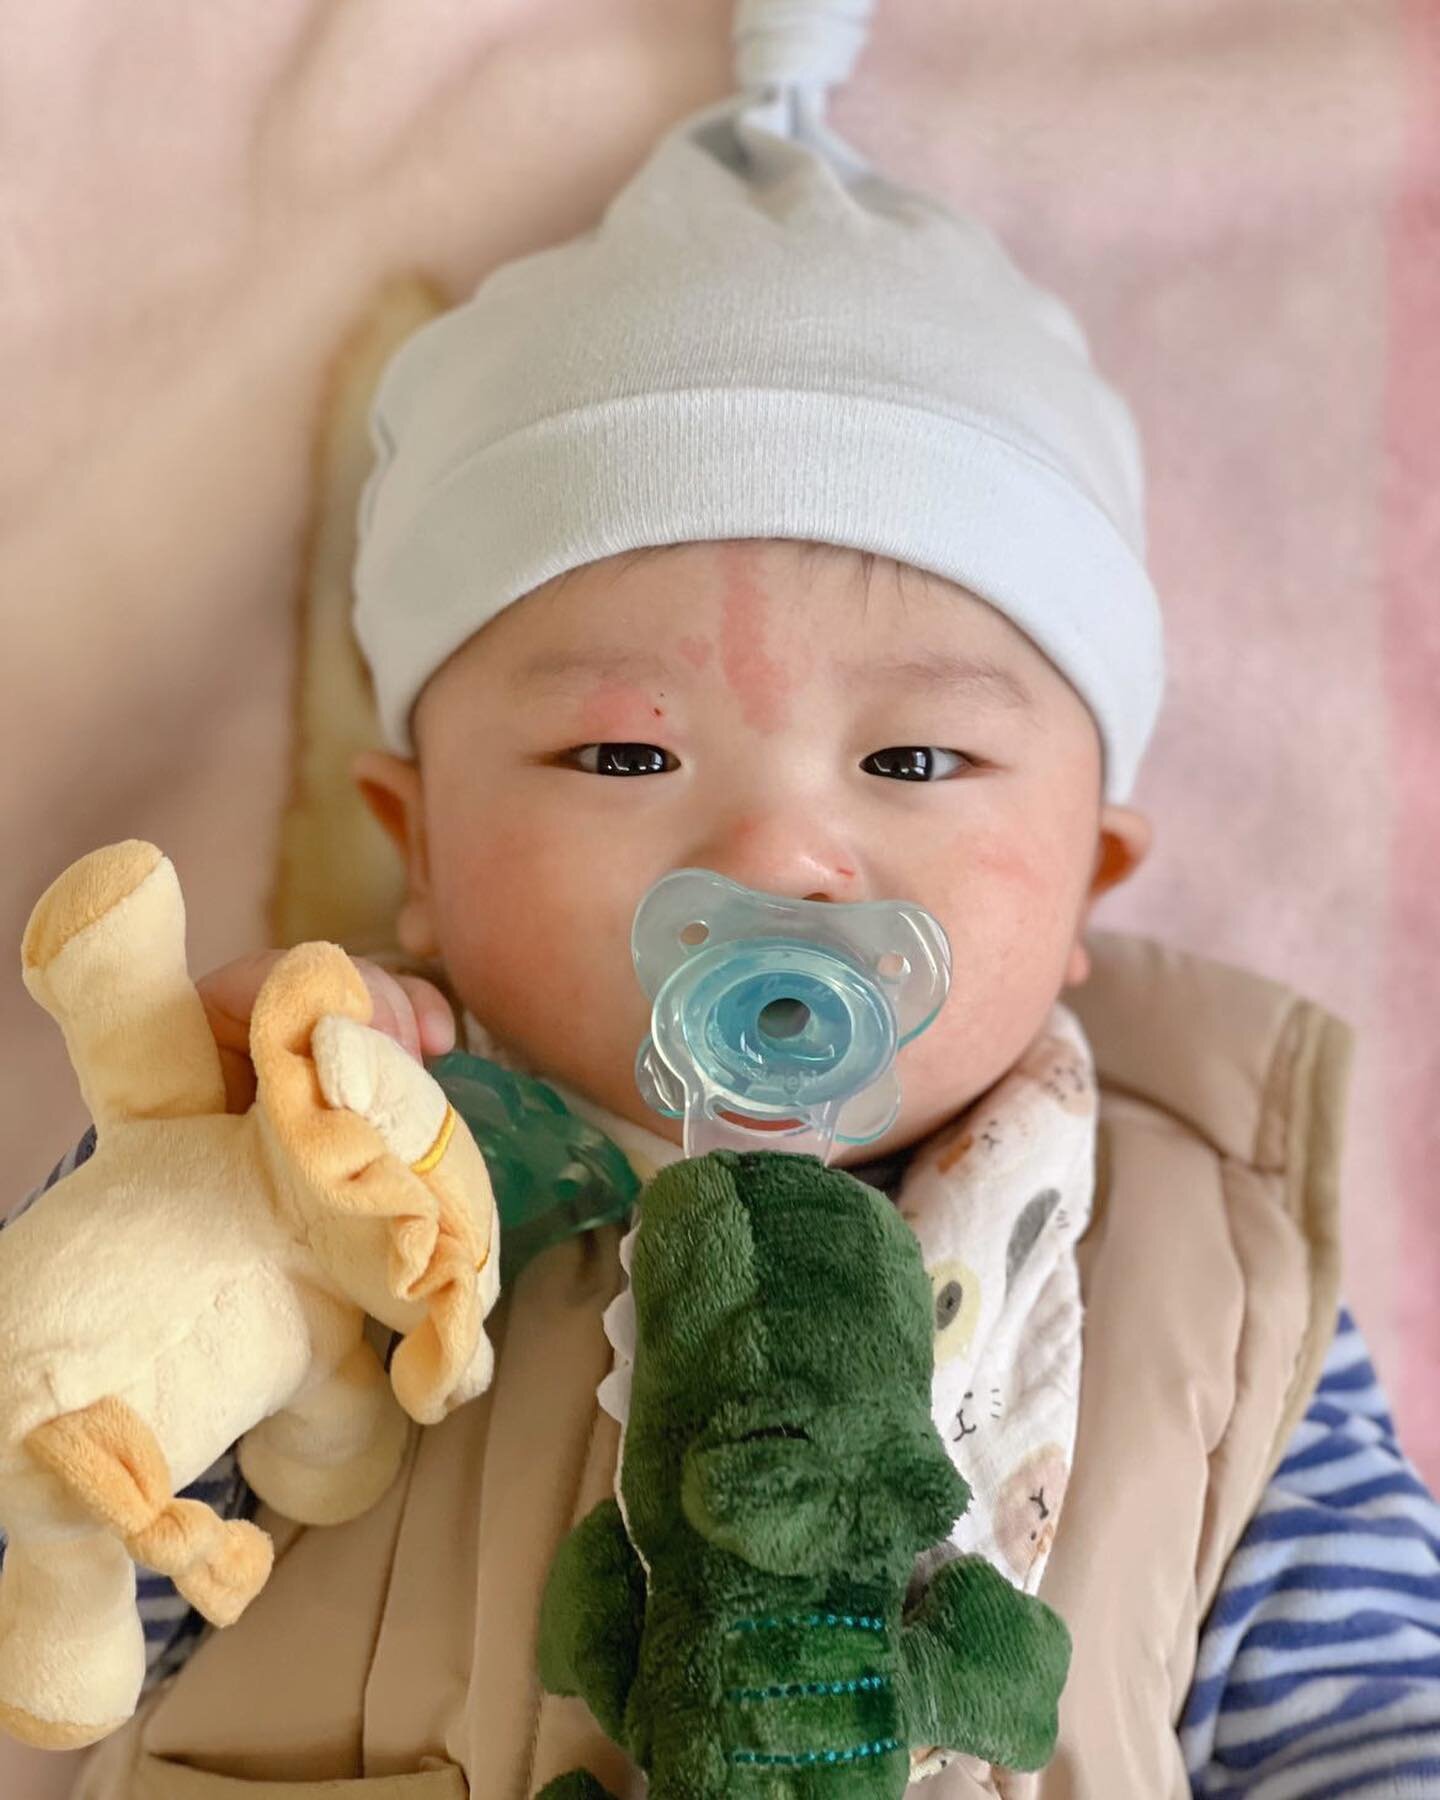 Perfectly capture the moment when the kid almost fallen asleep 😬
.
Thanks to @rainbowlikefire
.
#pacibuddy #paci #queebi #pacifier #baby #babystoreaustralia #babygiftsaustralia #babyshower